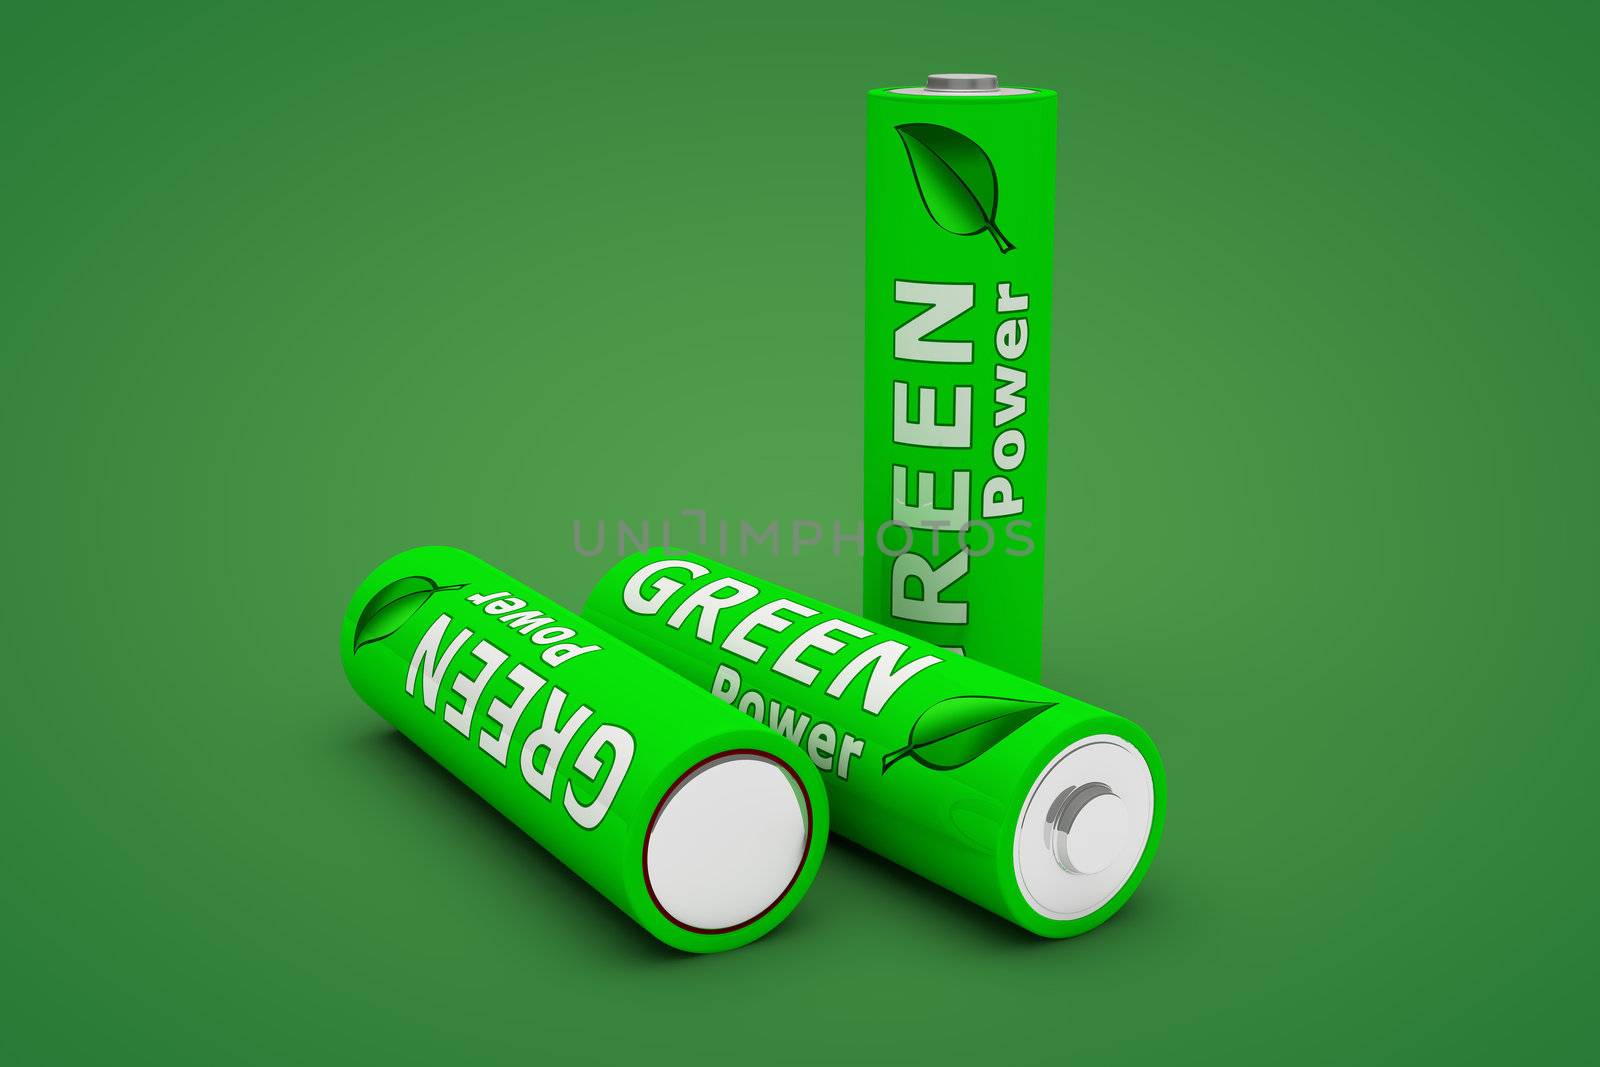 three green LR 6 1.5 volts batteries on a green background